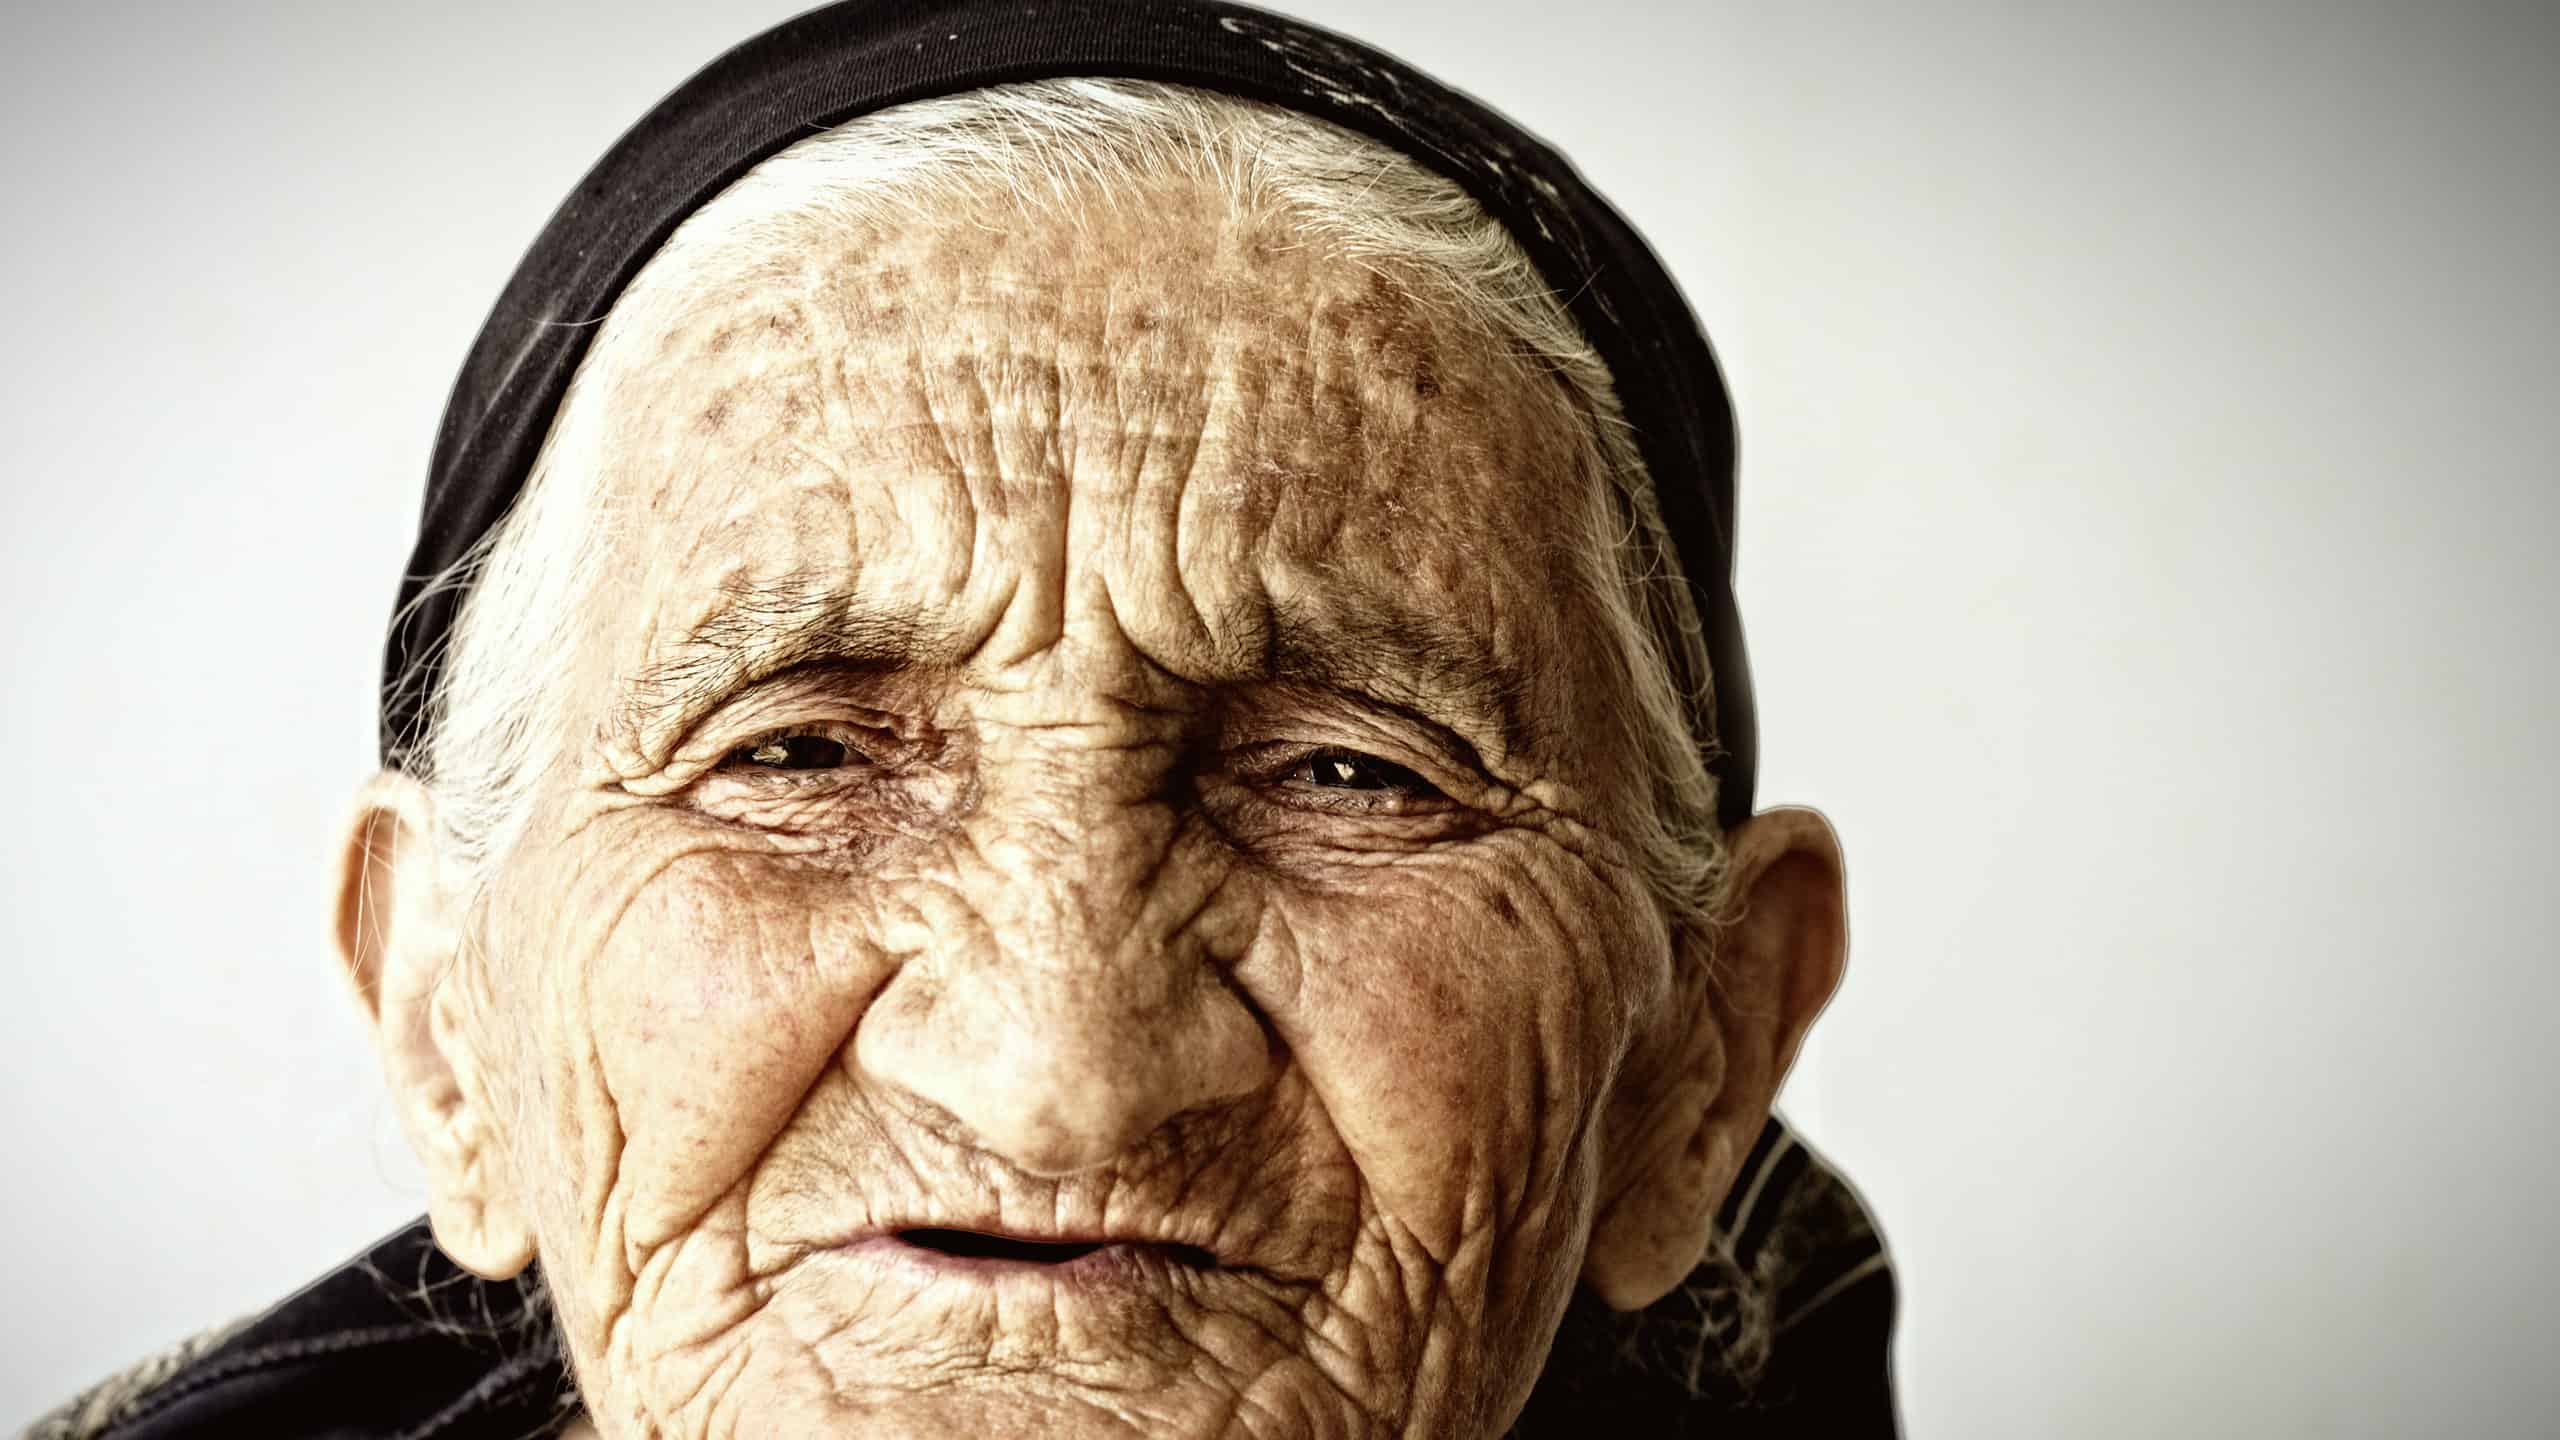 oldest person in the world ever